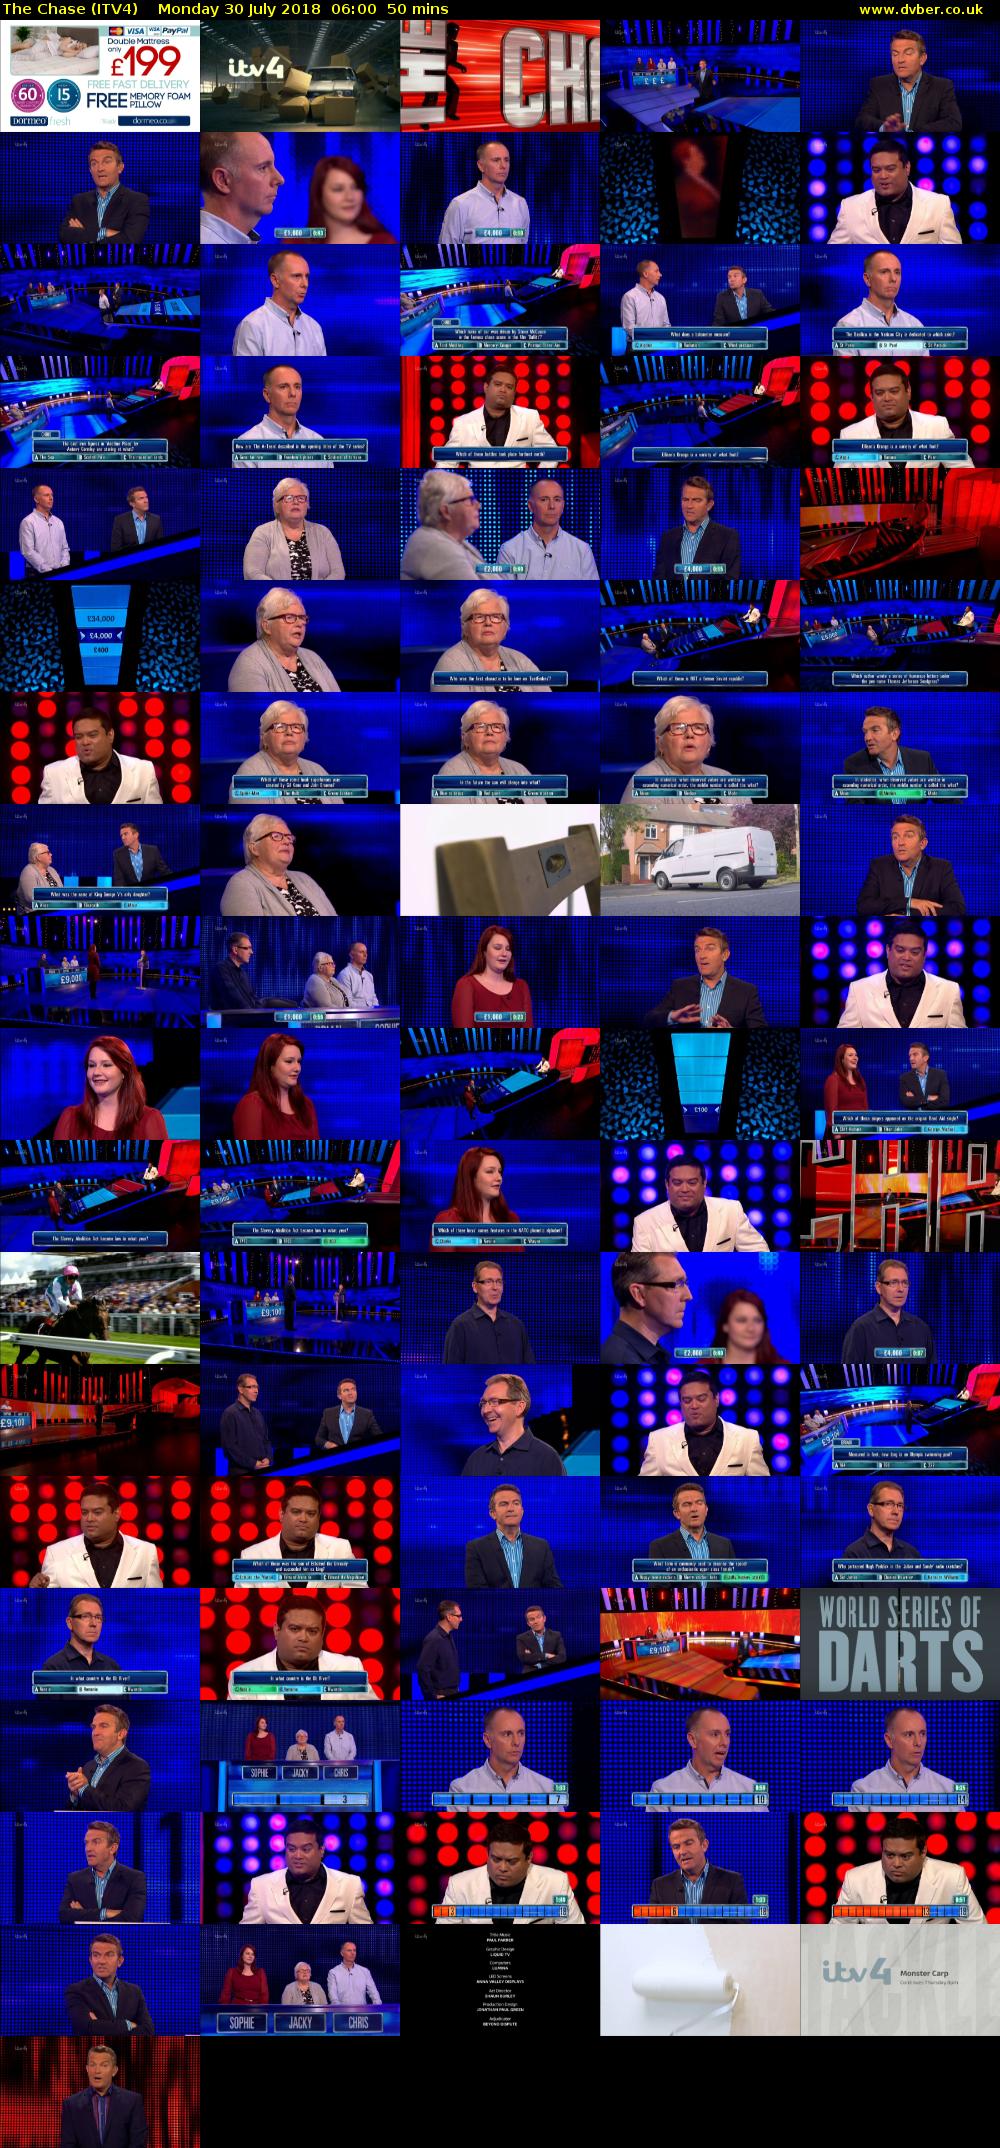 The Chase (ITV4) Monday 30 July 2018 06:00 - 06:50